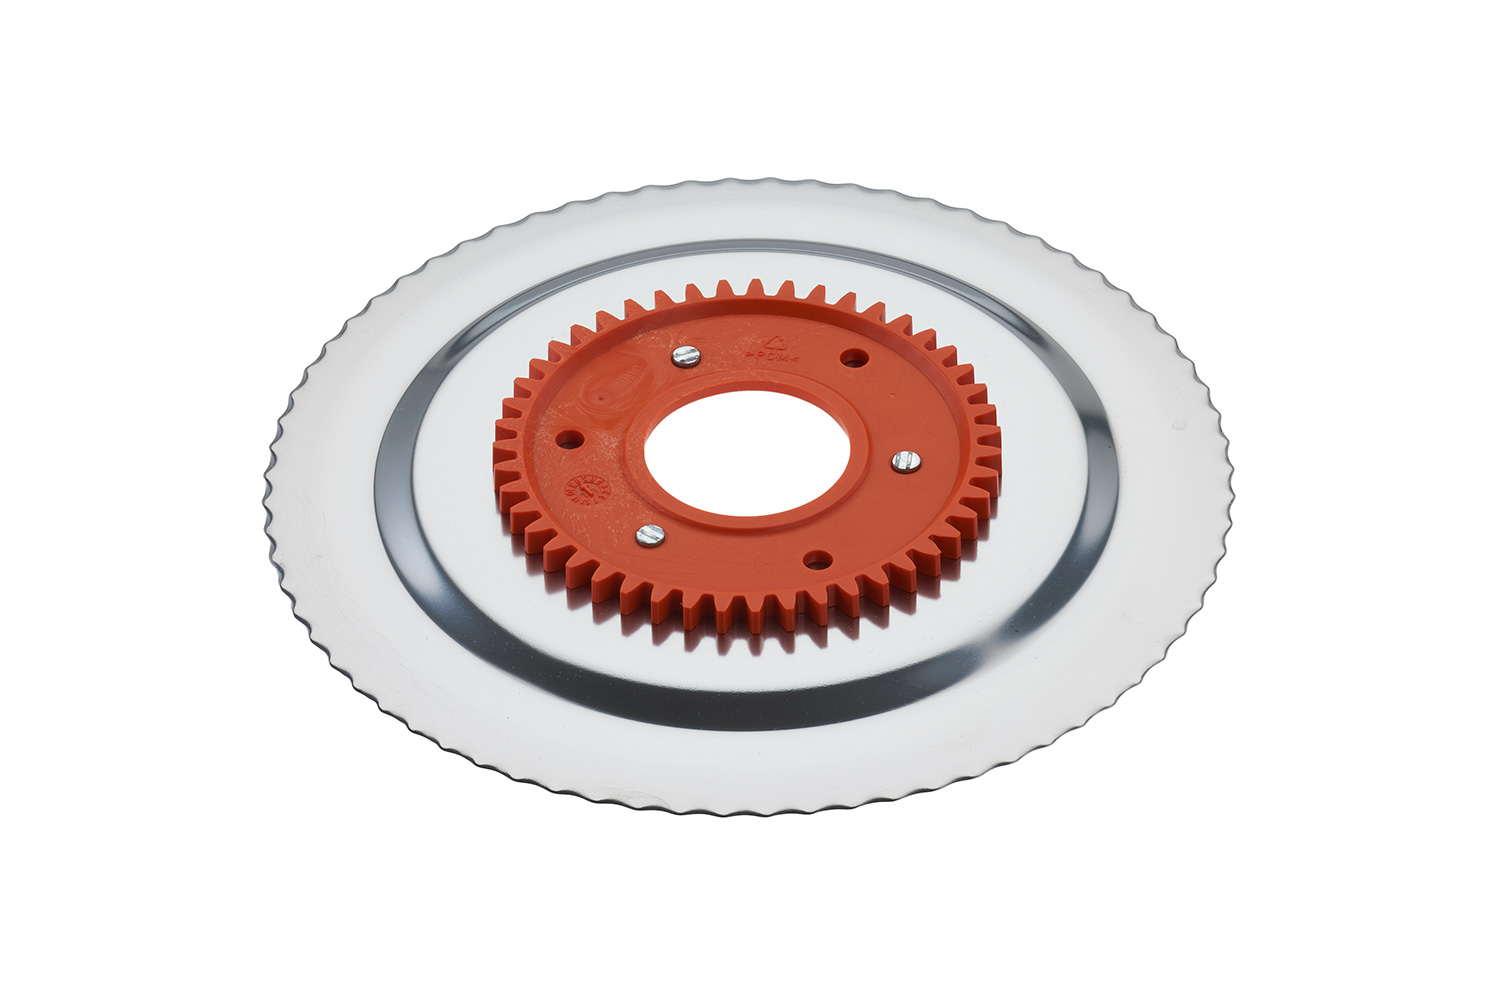 Serrated circular blade with electropolished surface and an orange gear